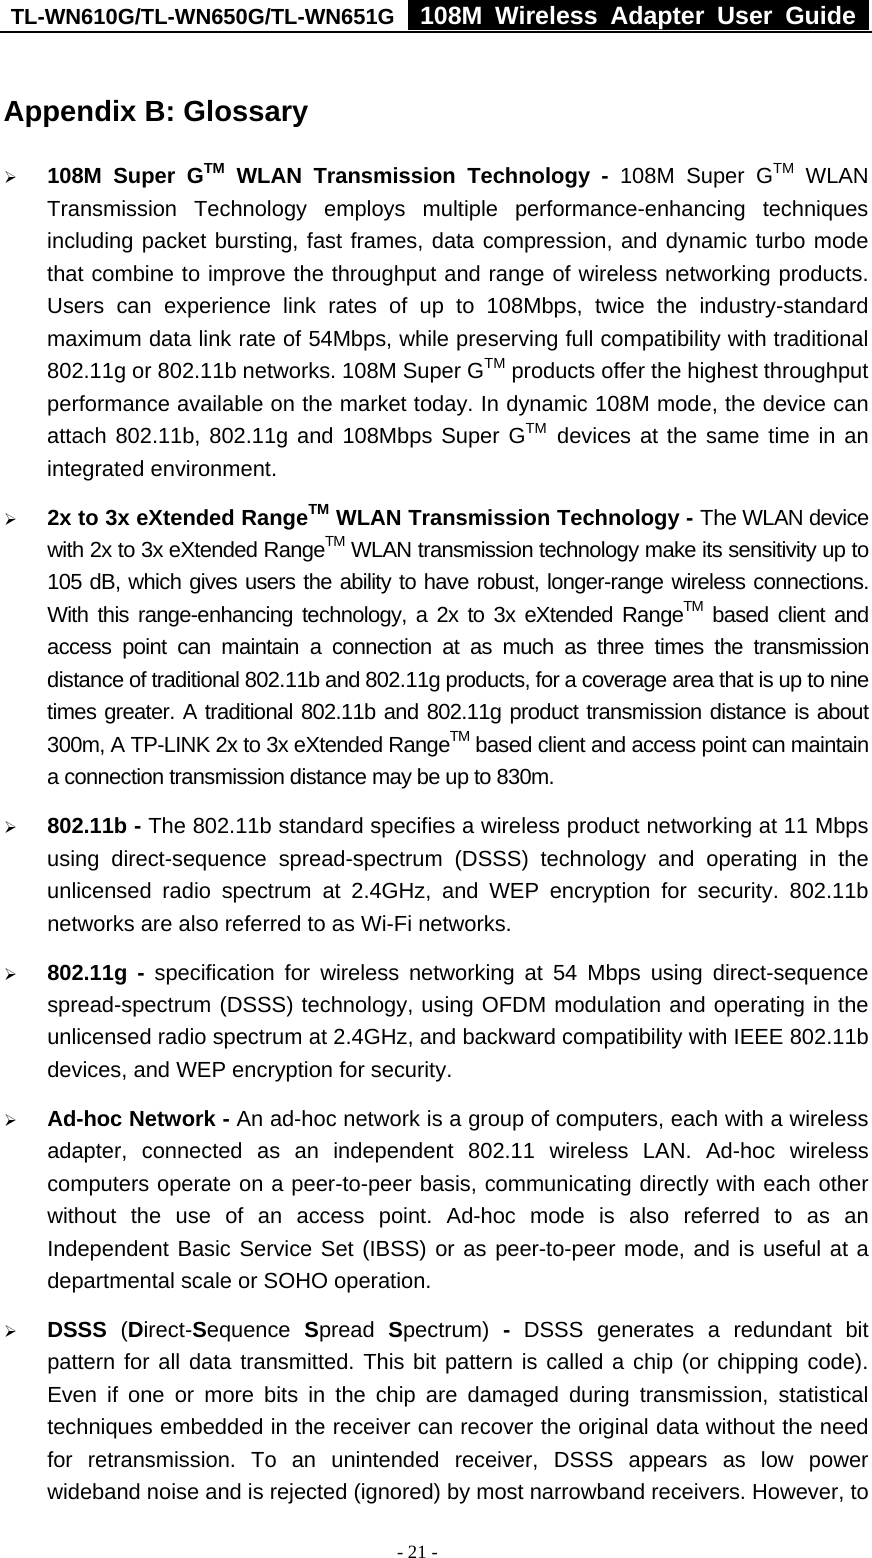 TL-WN610G/TL-WN650G/TL-WN651G  108M Wireless Adapter User Guide  - 21 - Appendix B: Glossary ¾ 108M Super GTM WLAN Transmission Technology - 108M Super GTM WLAN Transmission Technology employs multiple performance-enhancing techniques including packet bursting, fast frames, data compression, and dynamic turbo mode that combine to improve the throughput and range of wireless networking products. Users can experience link rates of up to 108Mbps, twice the industry-standard maximum data link rate of 54Mbps, while preserving full compatibility with traditional 802.11g or 802.11b networks. 108M Super GTM products offer the highest throughput performance available on the market today. In dynamic 108M mode, the device can attach 802.11b, 802.11g and 108Mbps Super GTM devices at the same time in an integrated environment. ¾ 2x to 3x eXtended RangeTM WLAN Transmission Technology - The WLAN device with 2x to 3x eXtended RangeTM WLAN transmission technology make its sensitivity up to 105 dB, which gives users the ability to have robust, longer-range wireless connections. With this range-enhancing technology, a 2x to 3x eXtended RangeTM based client and access point can maintain a connection at as much as three times the transmission distance of traditional 802.11b and 802.11g products, for a coverage area that is up to nine times greater. A traditional 802.11b and 802.11g product transmission distance is about 300m, A TP-LINK 2x to 3x eXtended RangeTM based client and access point can maintain a connection transmission distance may be up to 830m. ¾ 802.11b - The 802.11b standard specifies a wireless product networking at 11 Mbps using direct-sequence spread-spectrum (DSSS) technology and operating in the unlicensed radio spectrum at 2.4GHz, and WEP encryption for security. 802.11b networks are also referred to as Wi-Fi networks. ¾ 802.11g - specification for wireless networking at 54 Mbps using direct-sequence spread-spectrum (DSSS) technology, using OFDM modulation and operating in the unlicensed radio spectrum at 2.4GHz, and backward compatibility with IEEE 802.11b devices, and WEP encryption for security. ¾ Ad-hoc Network - An ad-hoc network is a group of computers, each with a wireless adapter, connected as an independent 802.11 wireless LAN. Ad-hoc wireless computers operate on a peer-to-peer basis, communicating directly with each other without the use of an access point. Ad-hoc mode is also referred to as an Independent Basic Service Set (IBSS) or as peer-to-peer mode, and is useful at a departmental scale or SOHO operation.   ¾ DSSS  (Direct-Sequence  Spread  Spectrum)  - DSSS generates a redundant bit pattern for all data transmitted. This bit pattern is called a chip (or chipping code). Even if one or more bits in the chip are damaged during transmission, statistical techniques embedded in the receiver can recover the original data without the need for retransmission. To an unintended receiver, DSSS appears as low power wideband noise and is rejected (ignored) by most narrowband receivers. However, to 